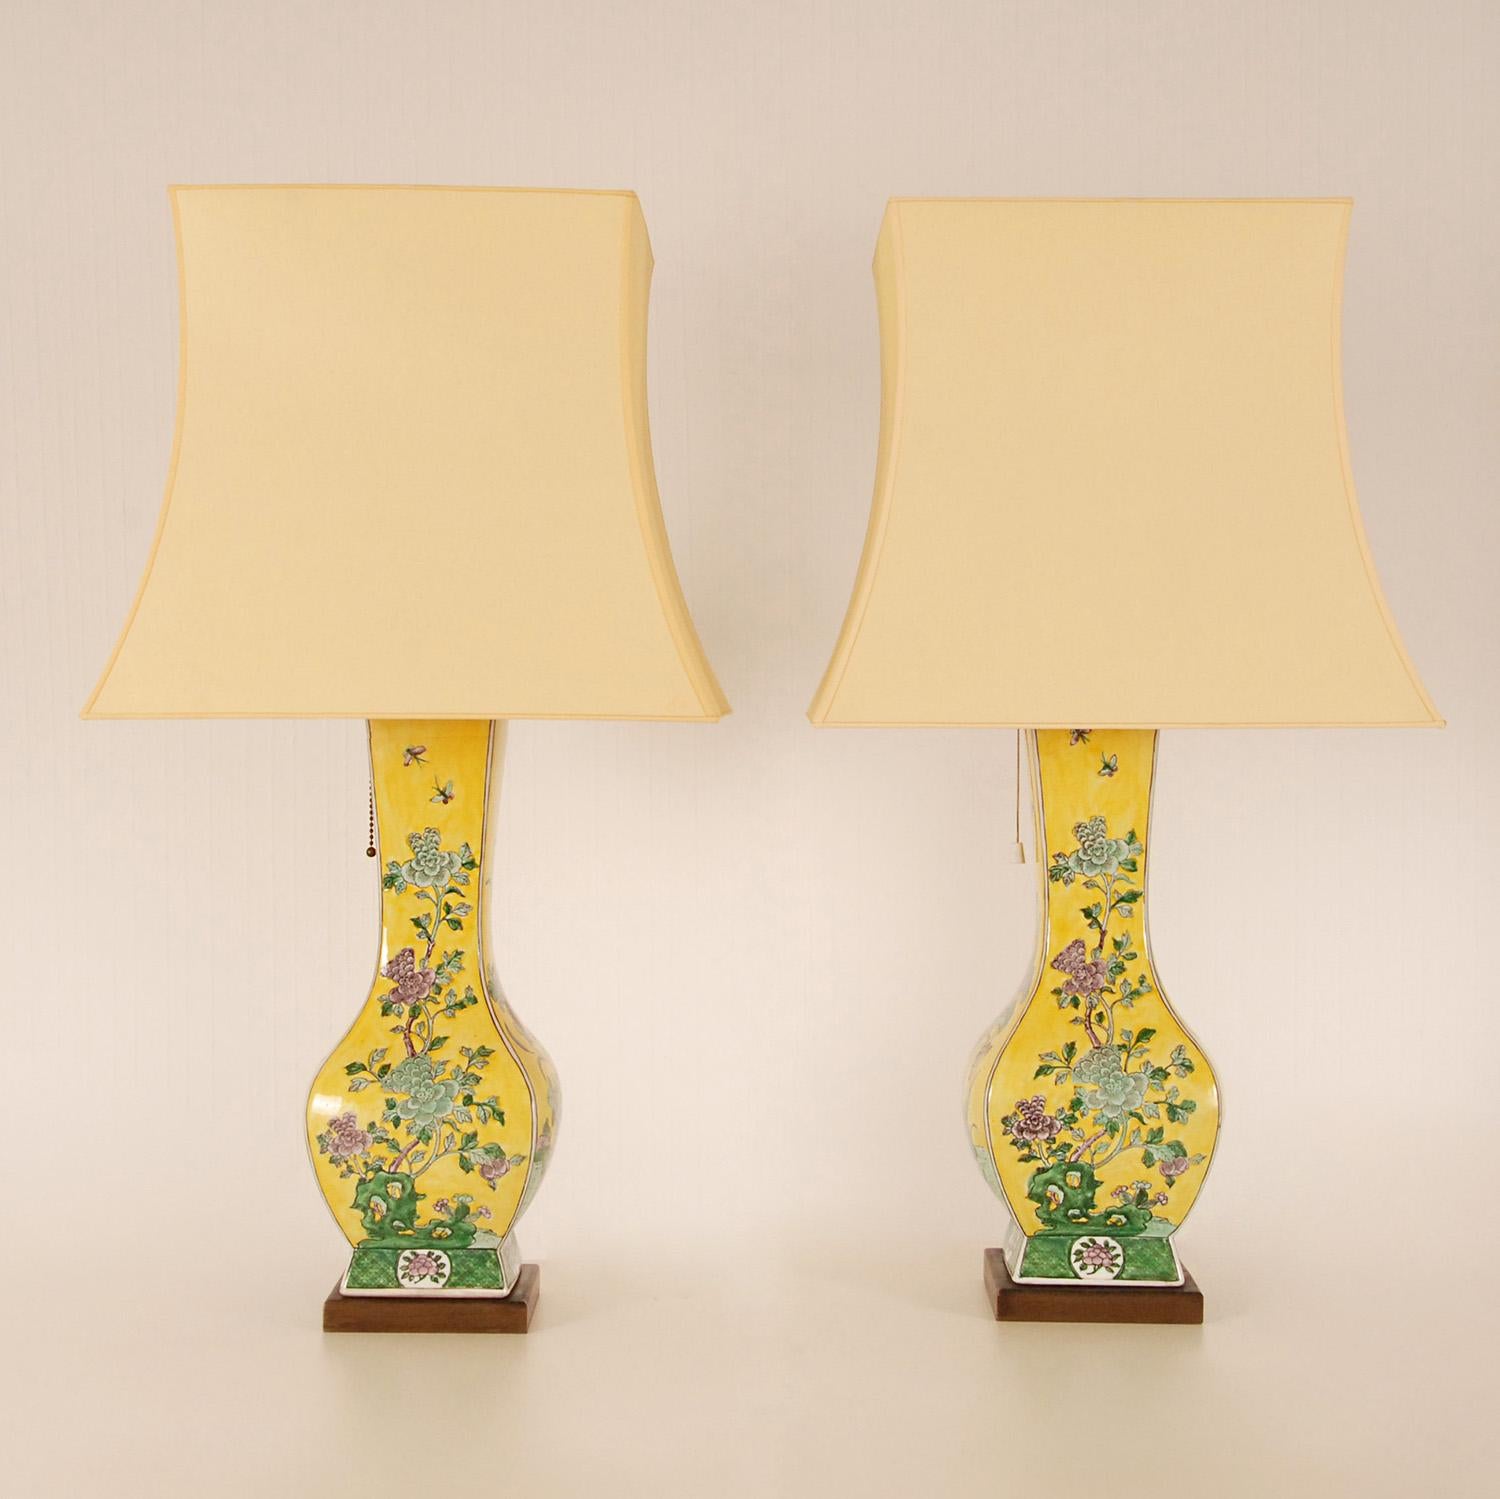 Vintage Ceramic Oriental chinoiserie yellow table lamps with soft yellow pagoda lampshade
Material: Ceramic, Porcelain, fabric
Style: Vintage, Antique, Oriental, Chinese, famille Jaune
Design: In the style of the Chinese Emperor Kangxi
Technique: